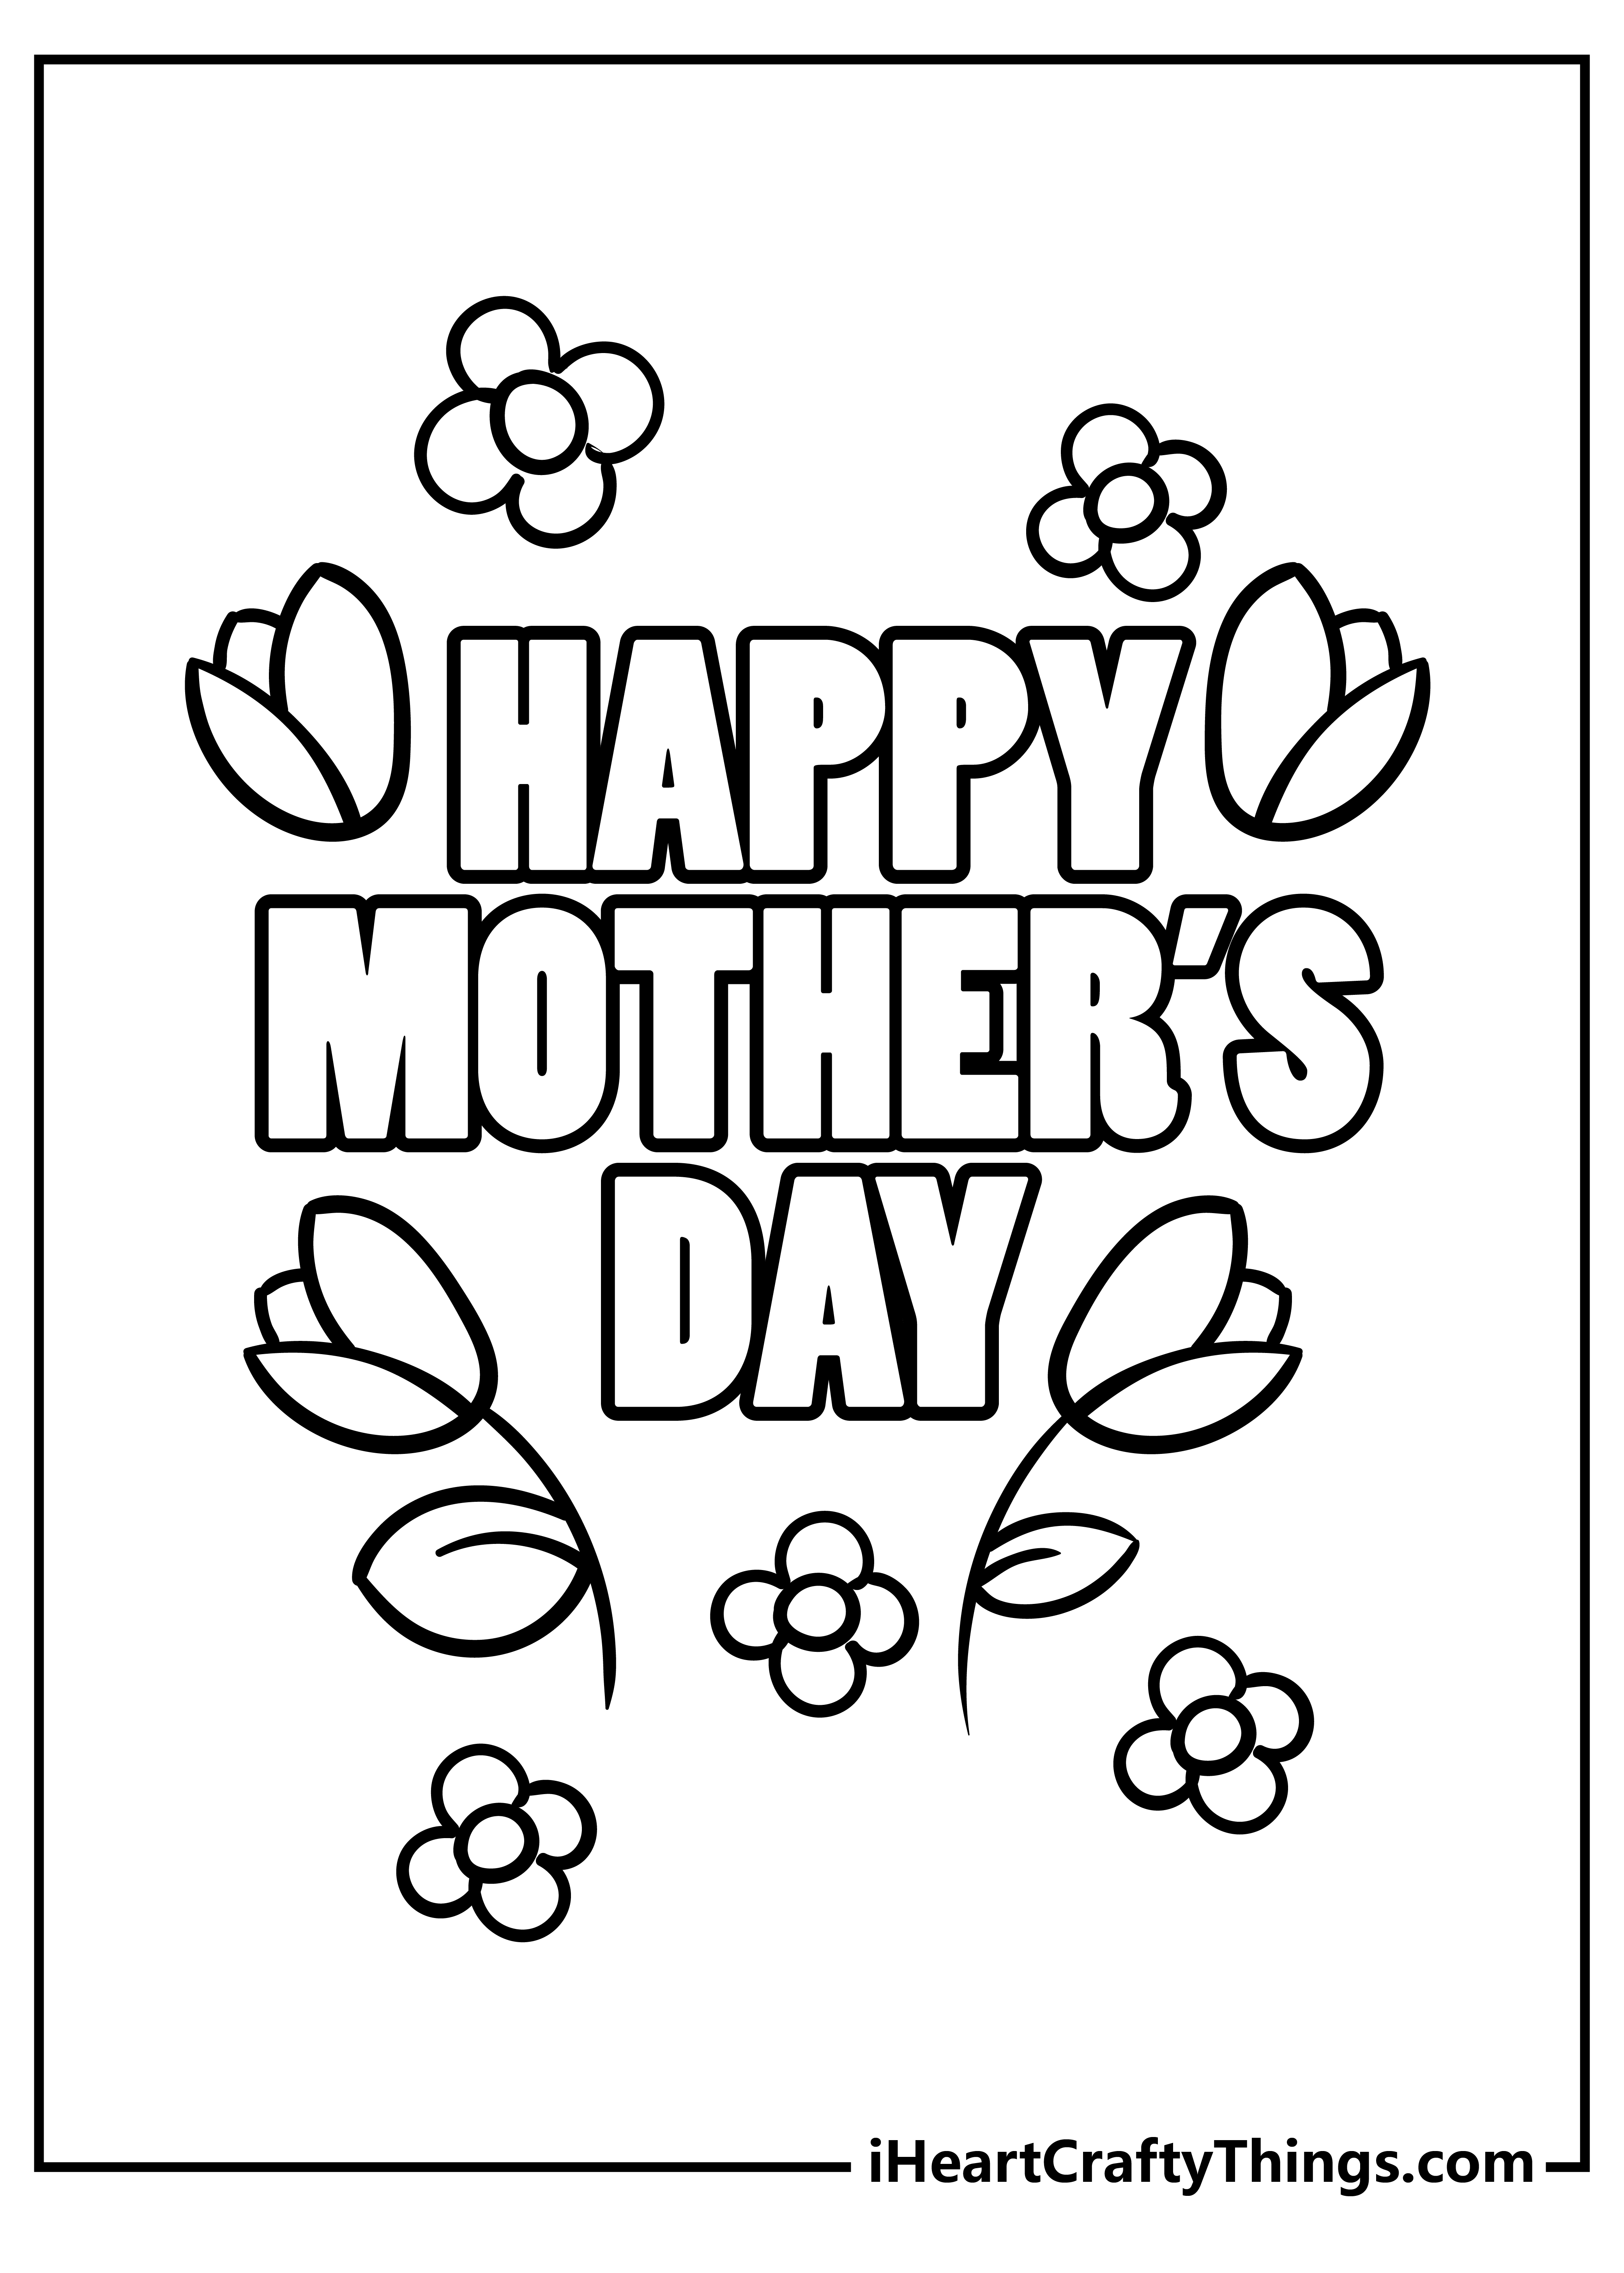 Mother’s Day Coloring Pages for preschoolers free printable